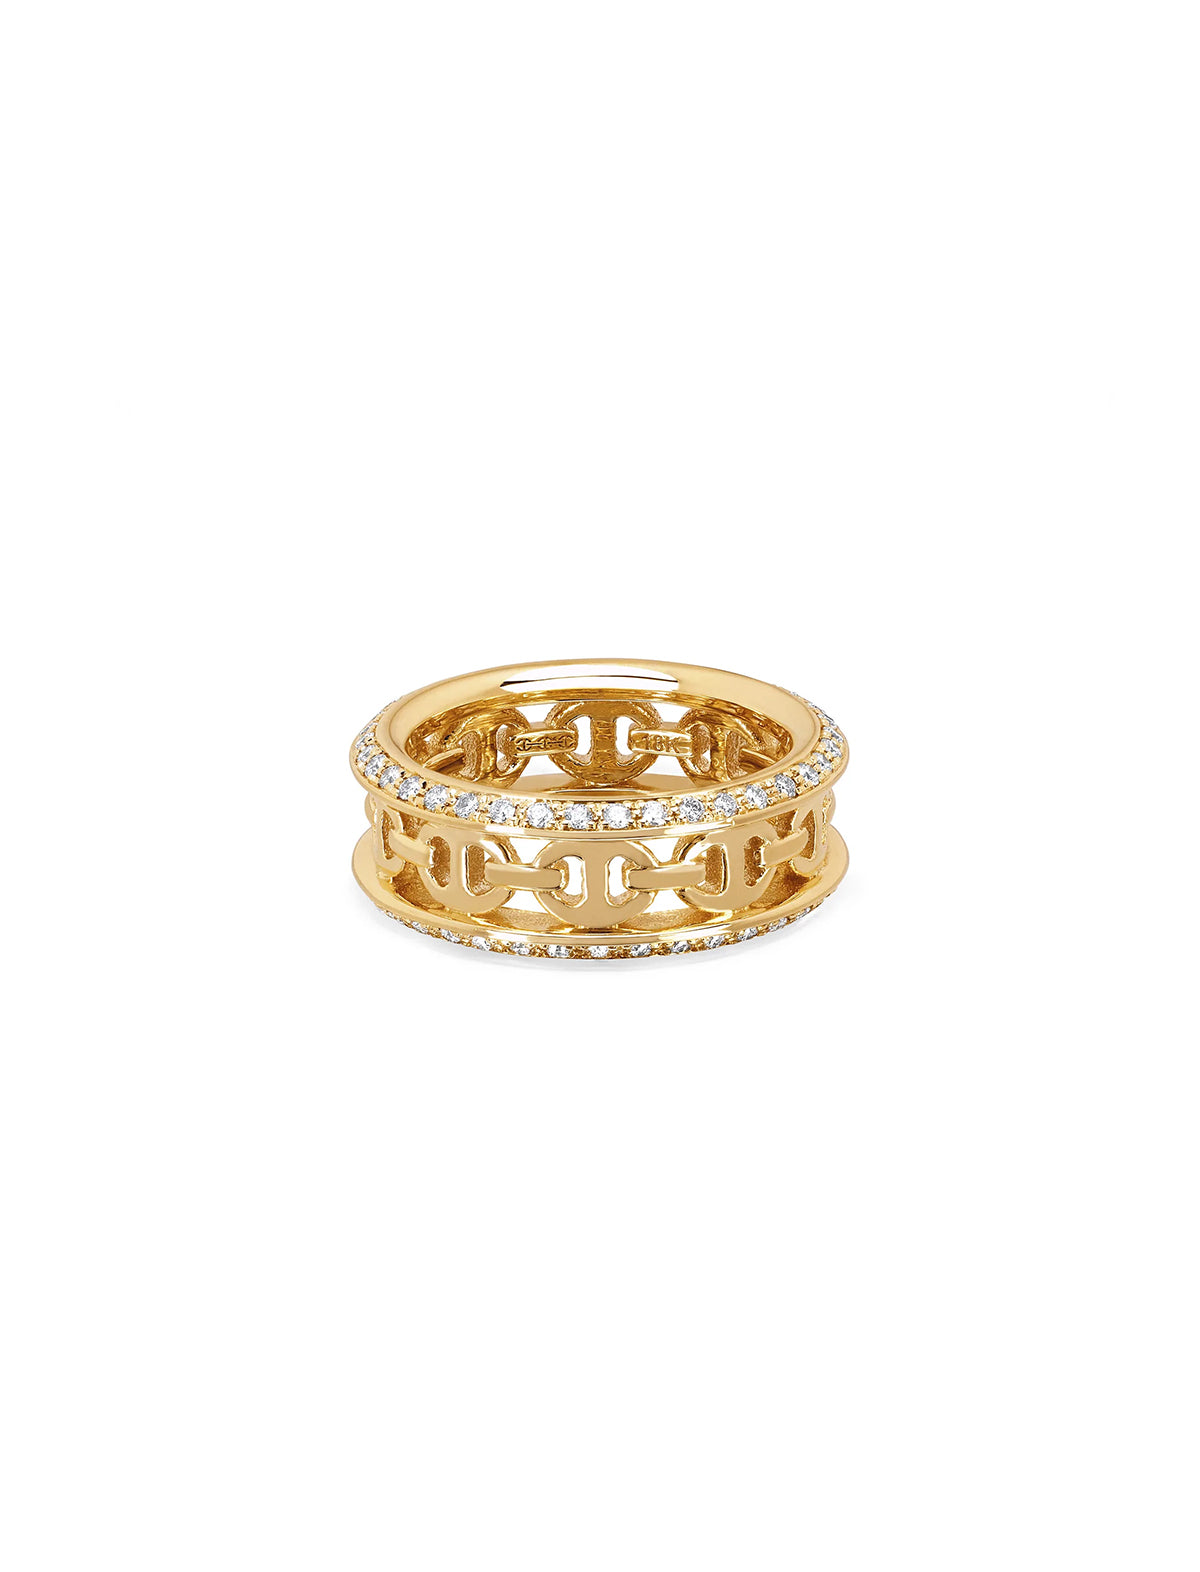 HOORSENBUHS Chassis with Diamonds Ring 18k Yellow Gold